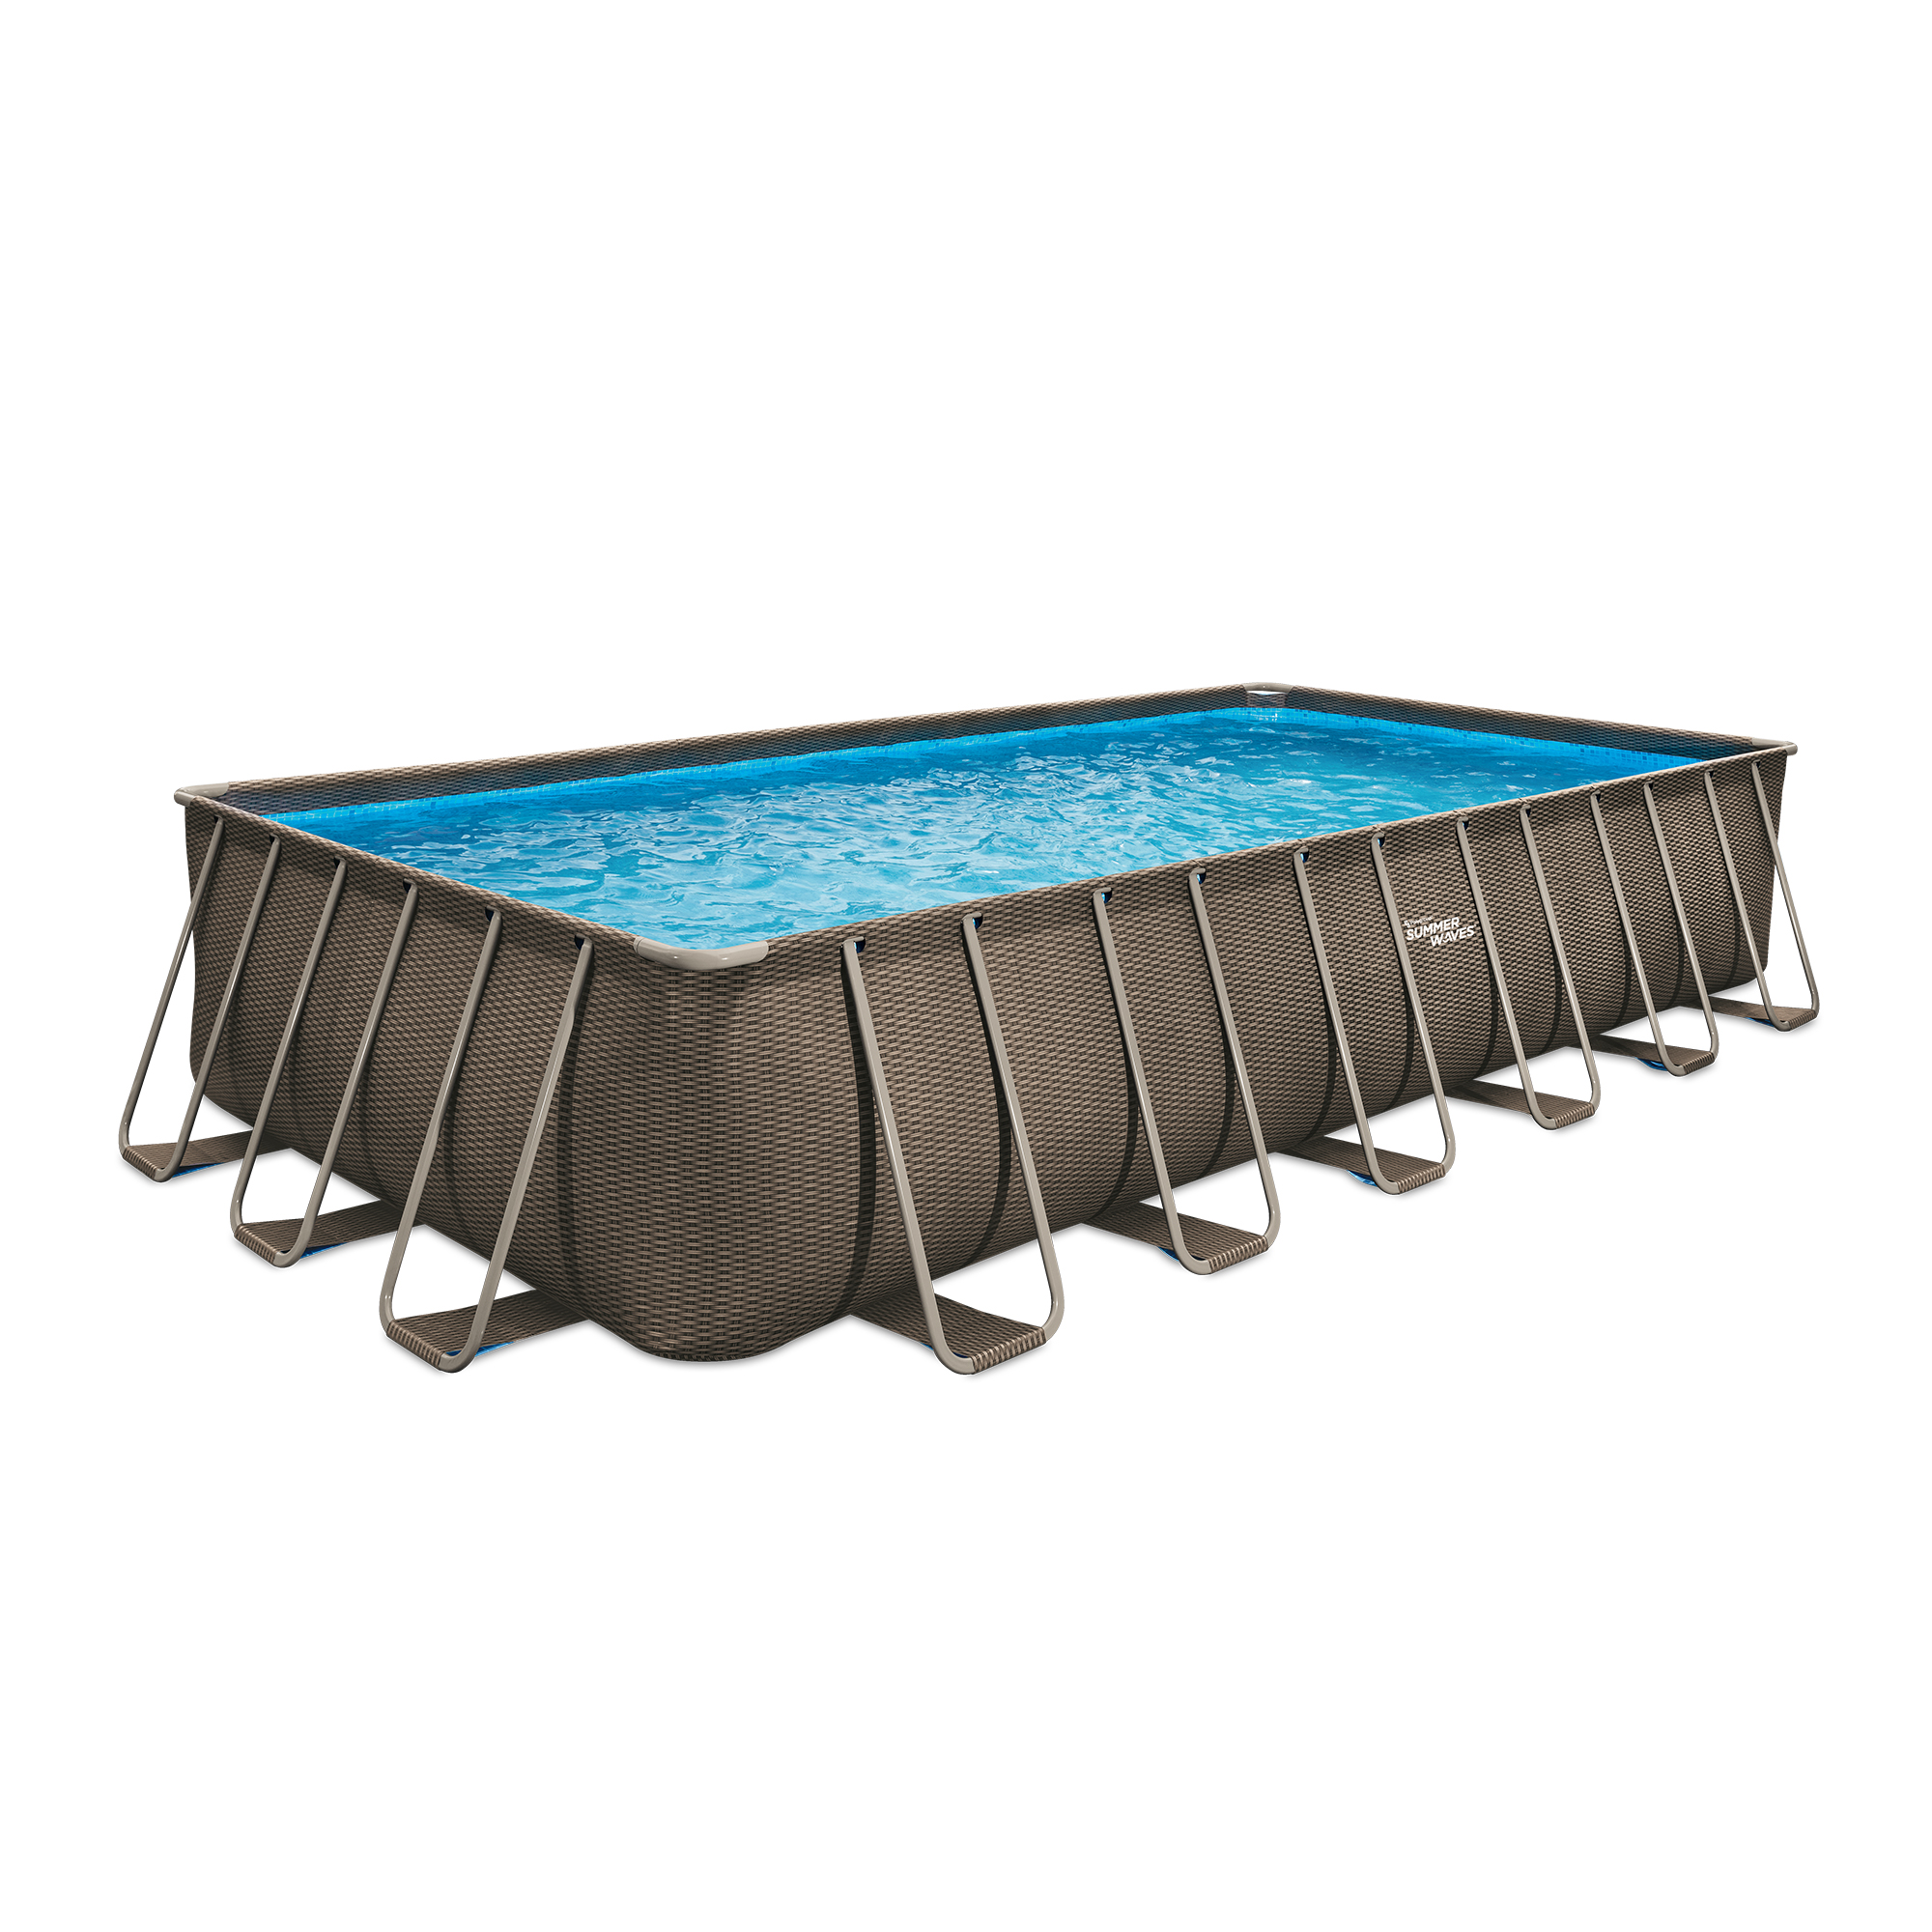 Summer Waves 24 ft Dark Double Rattan Print Elite Rectangular Frame About Ground Pool,  Age 6 & up - image 1 of 7